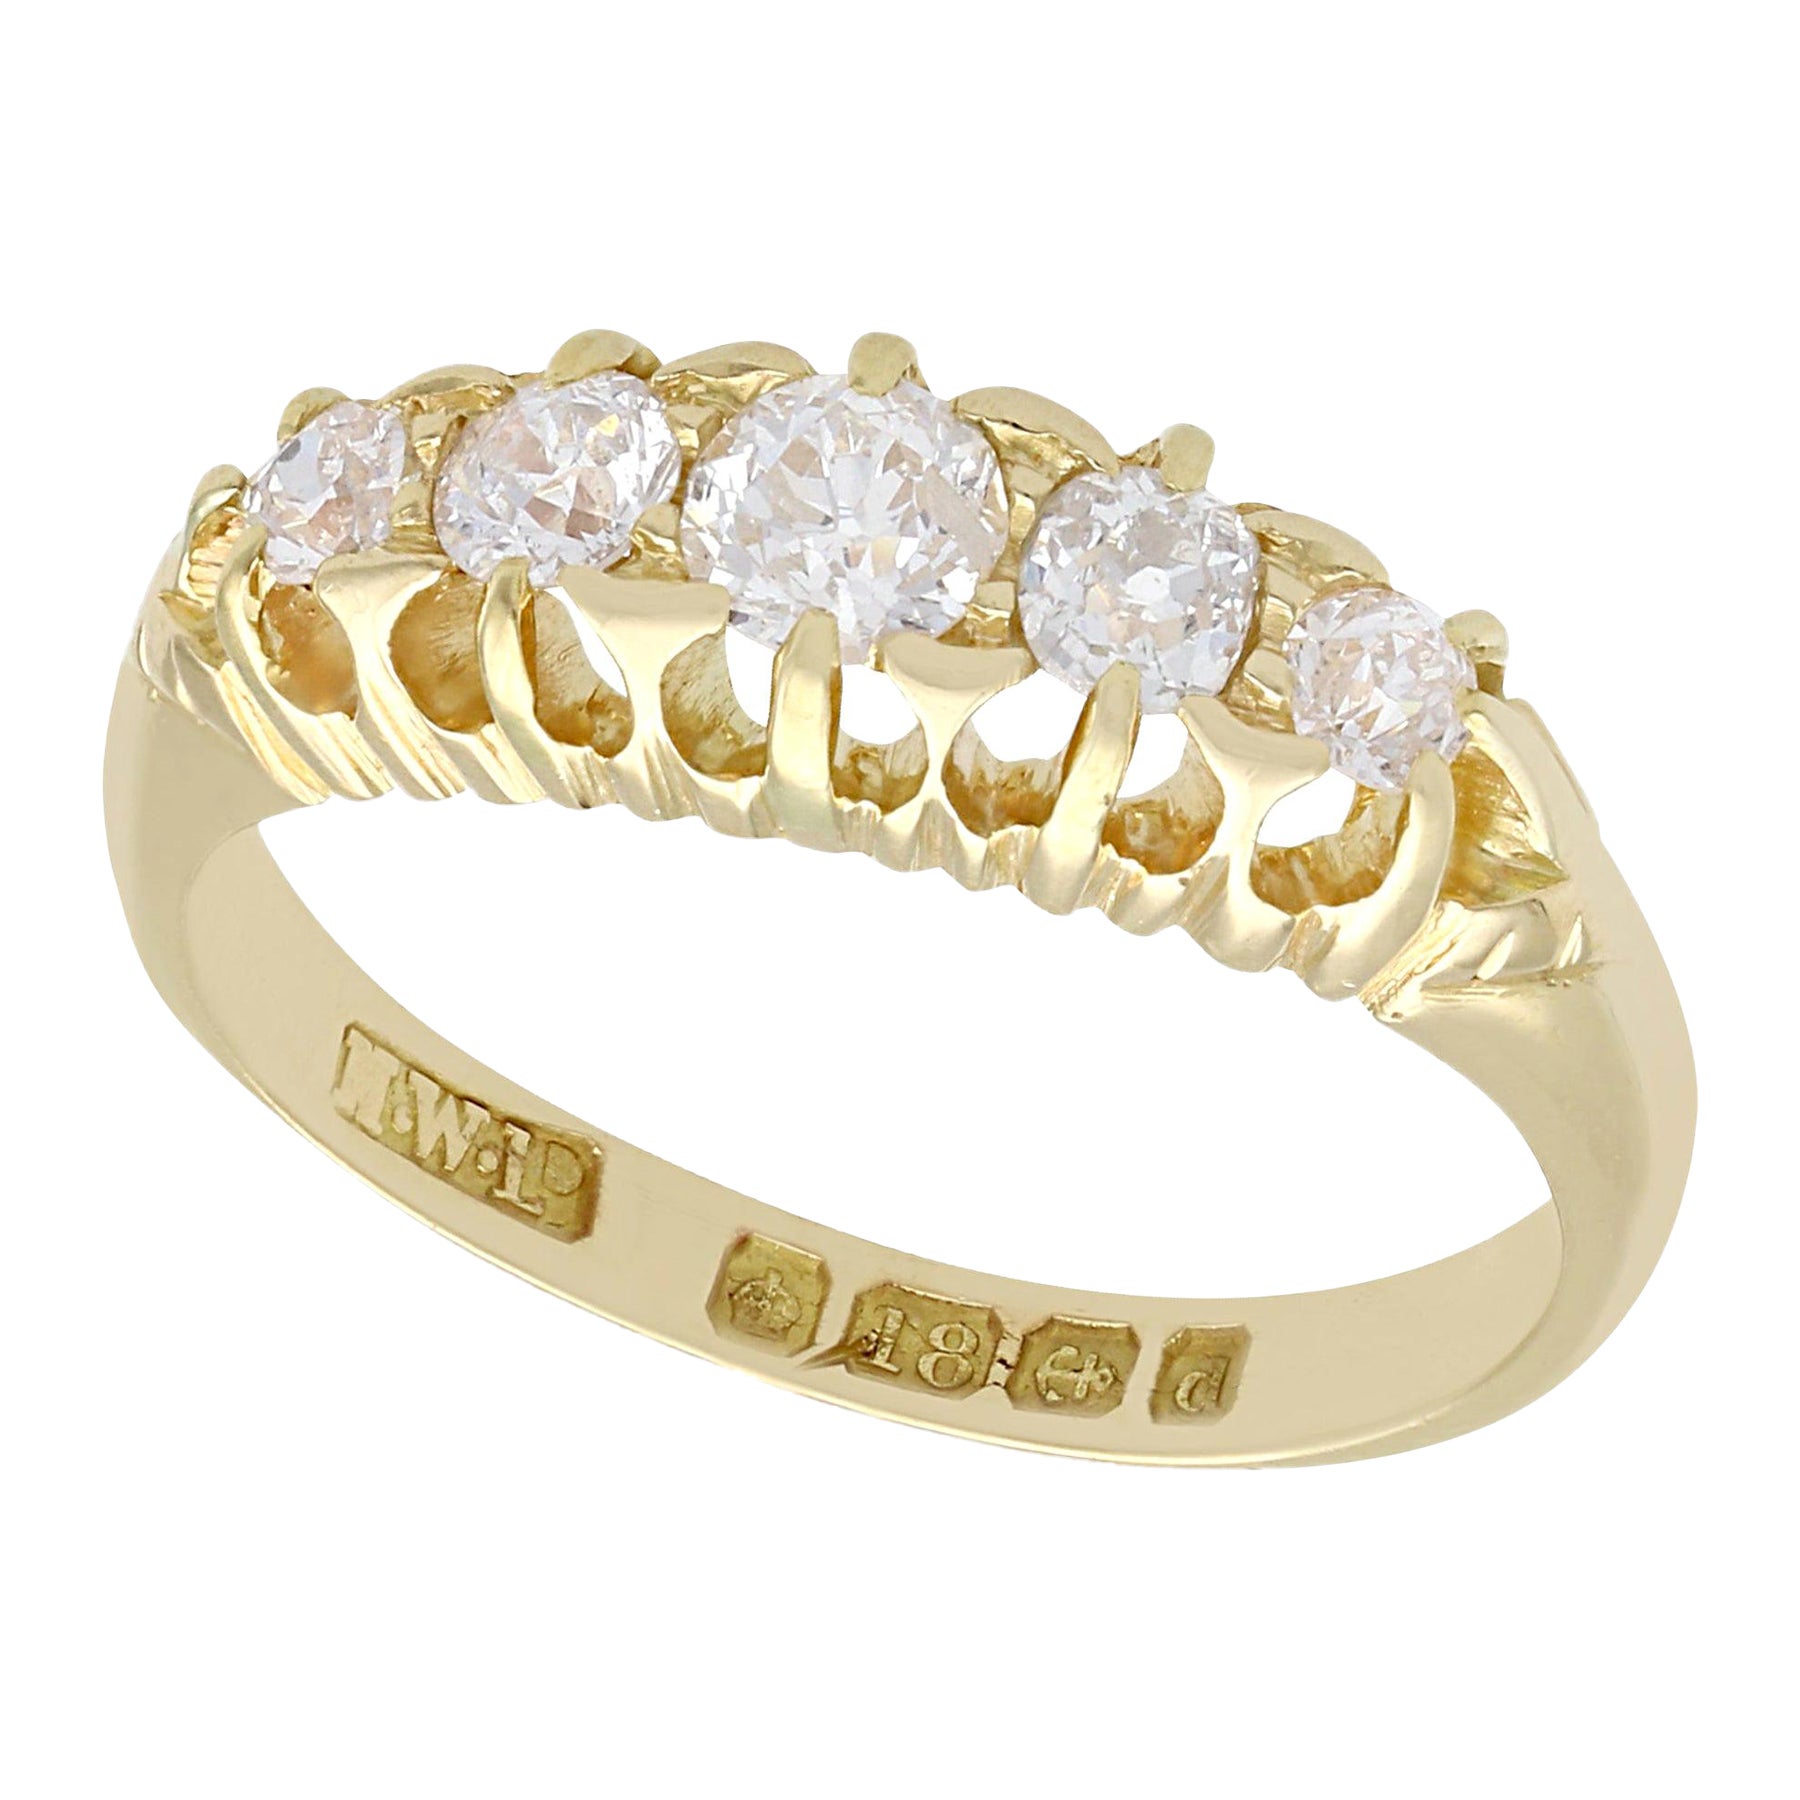 Antique Diamond and 18K Yellow Gold Five Stone Ring